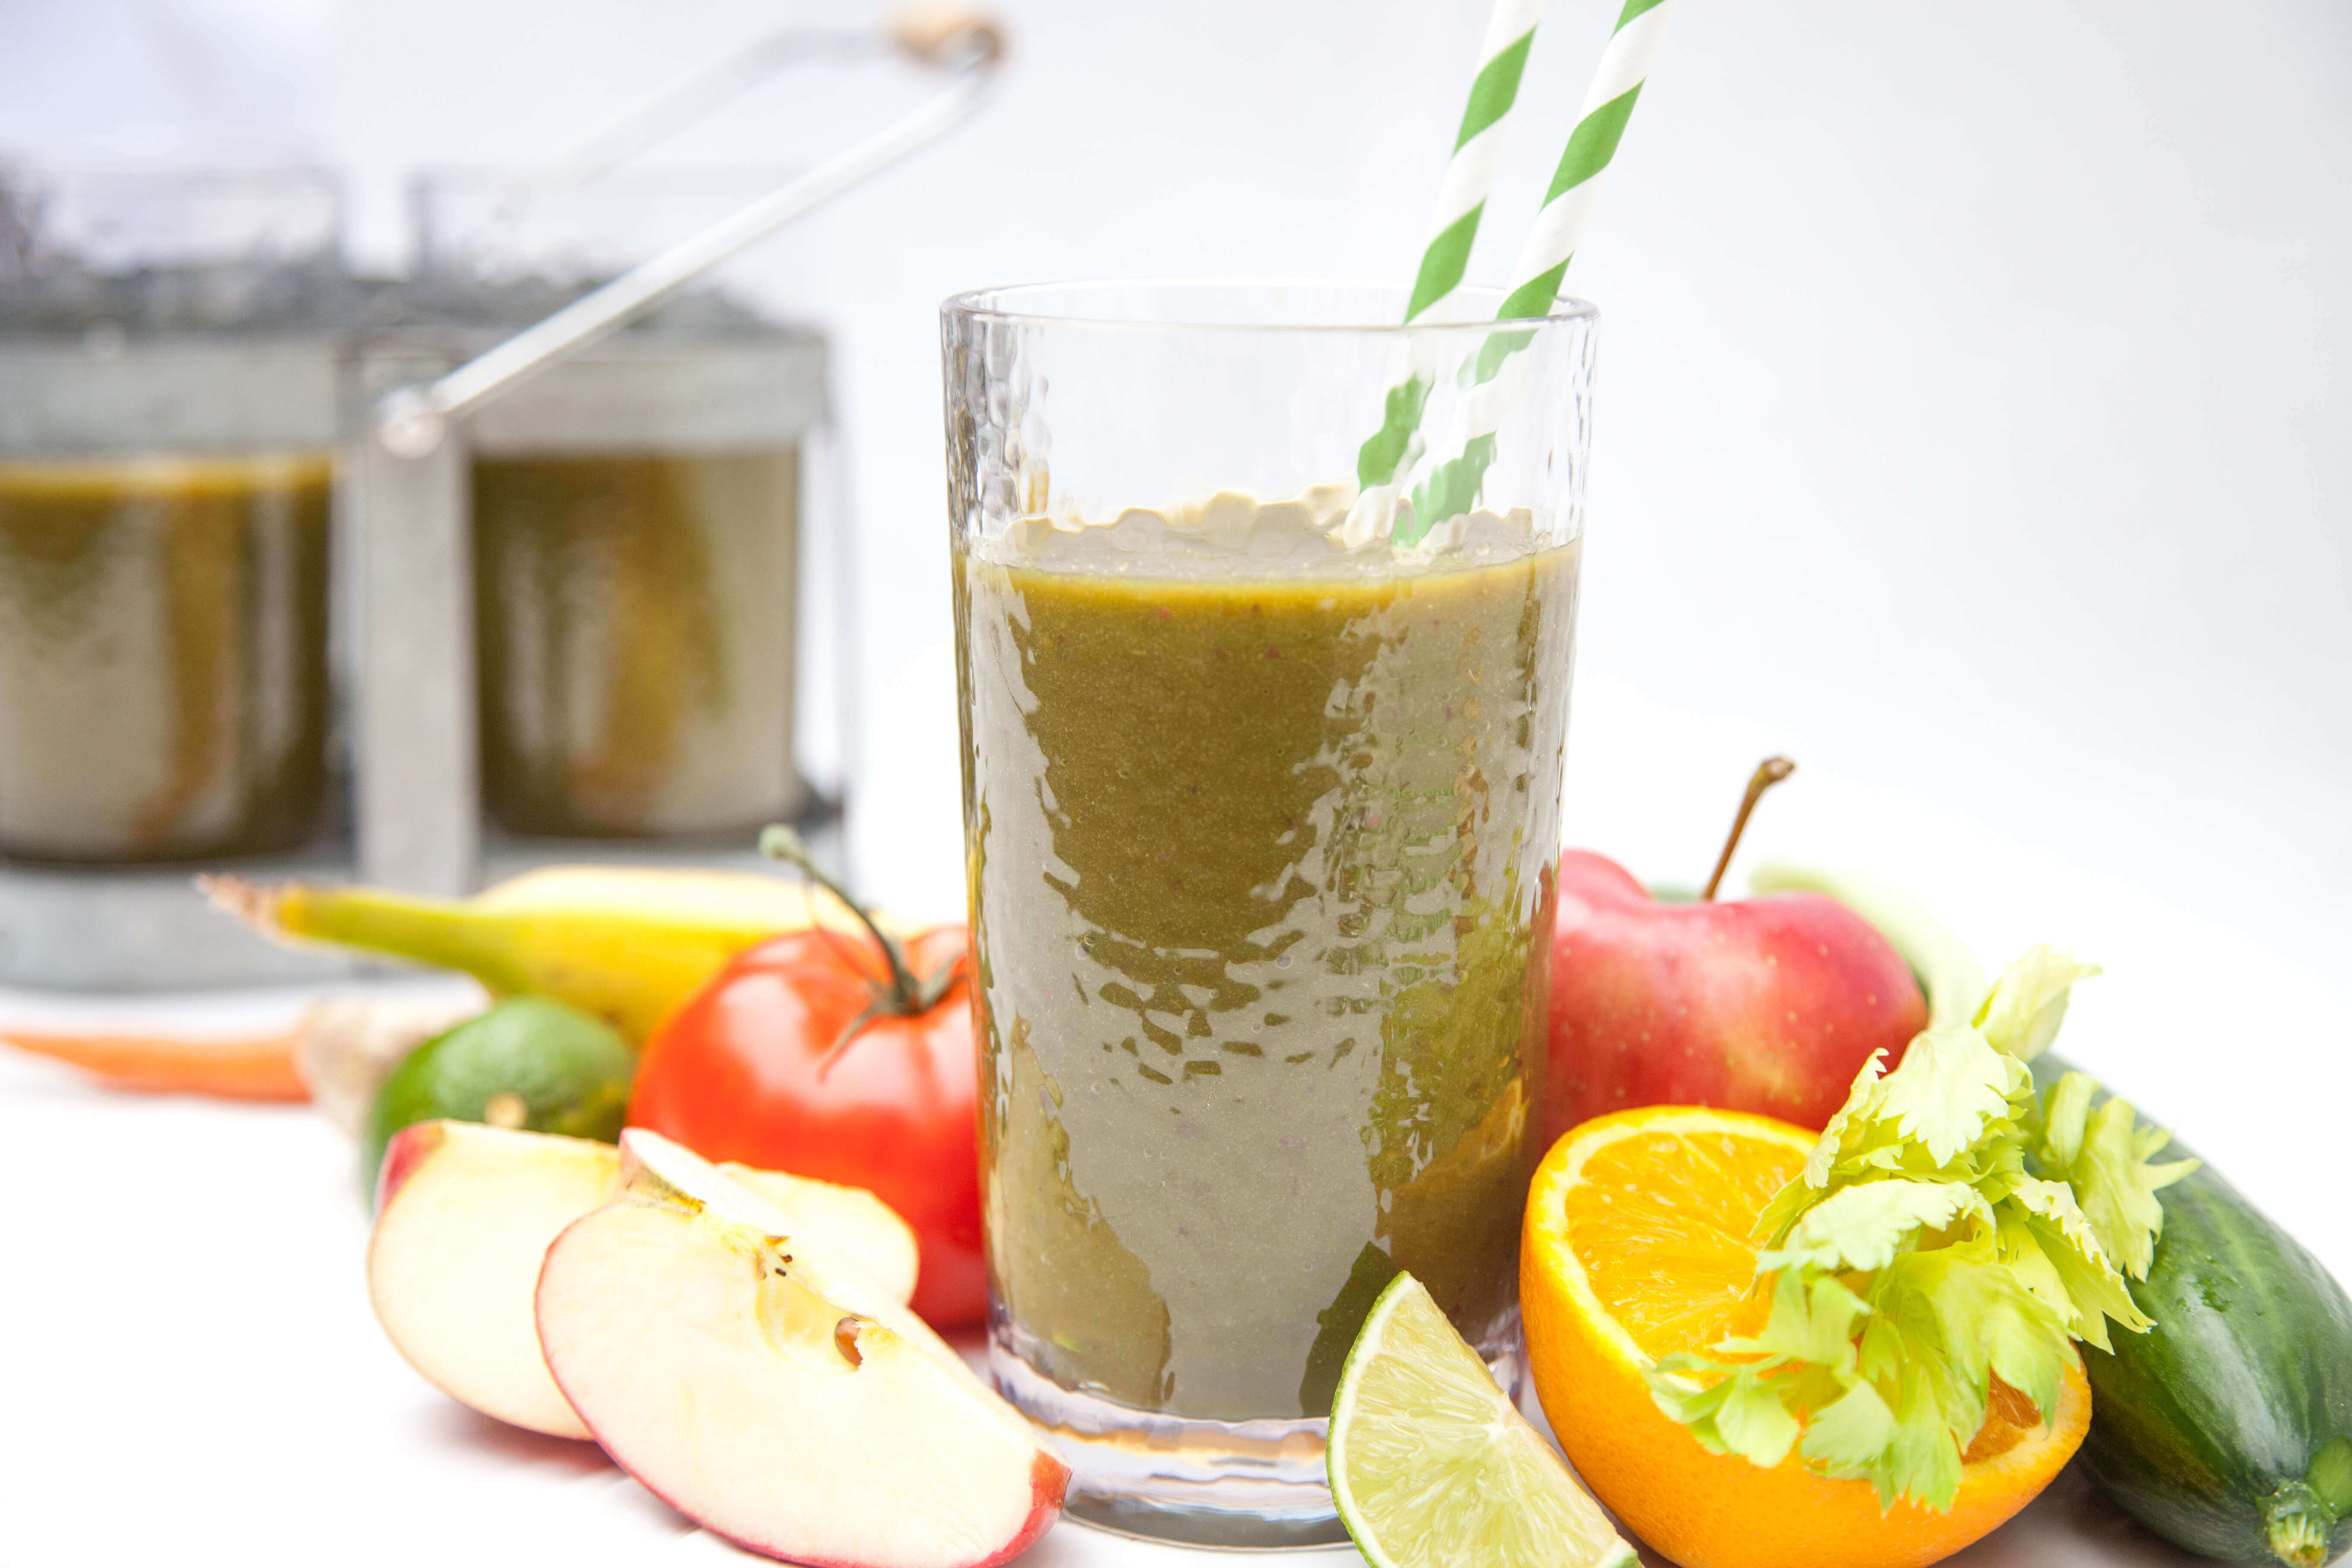 Go Big−Mixed Greens Smoothie with Sweet Apples